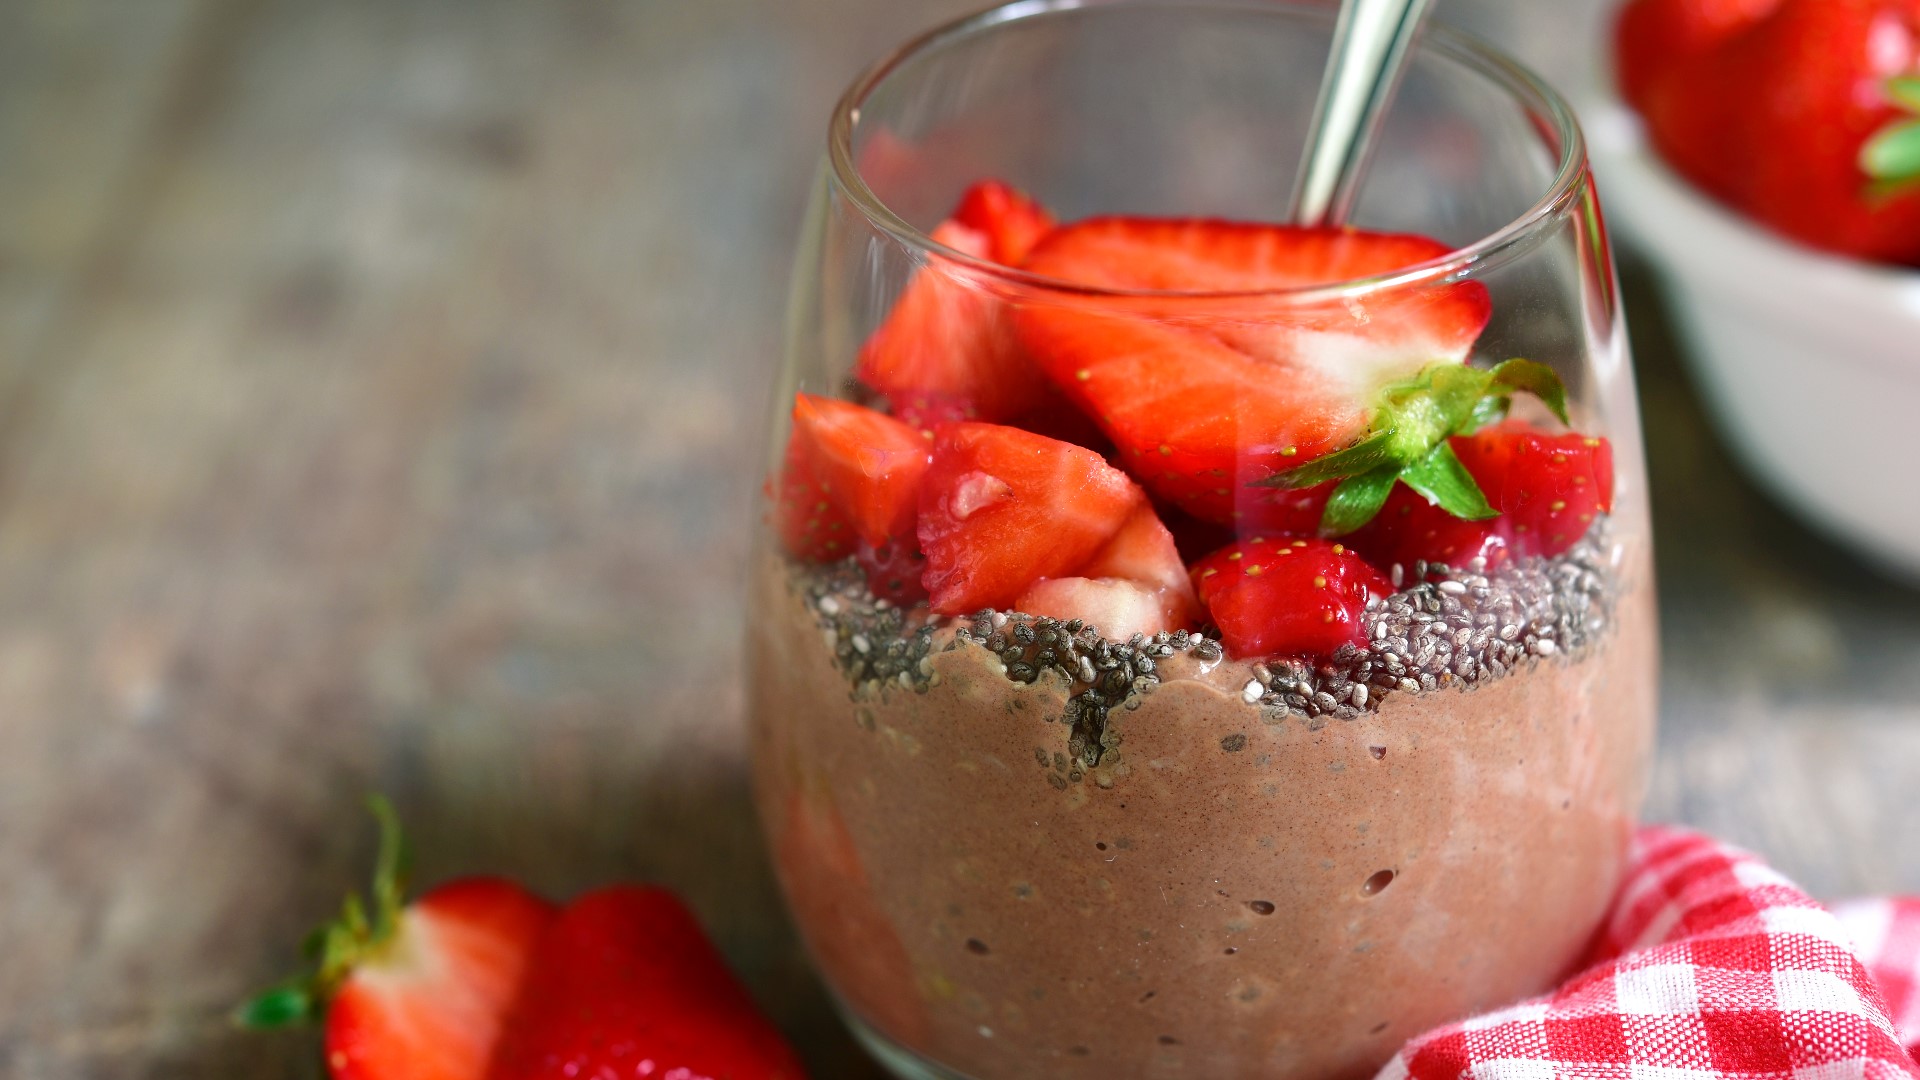 Comfort Food Makeovers From A Wellness Chef: Chocolate Chia Seed Pudding Recipe